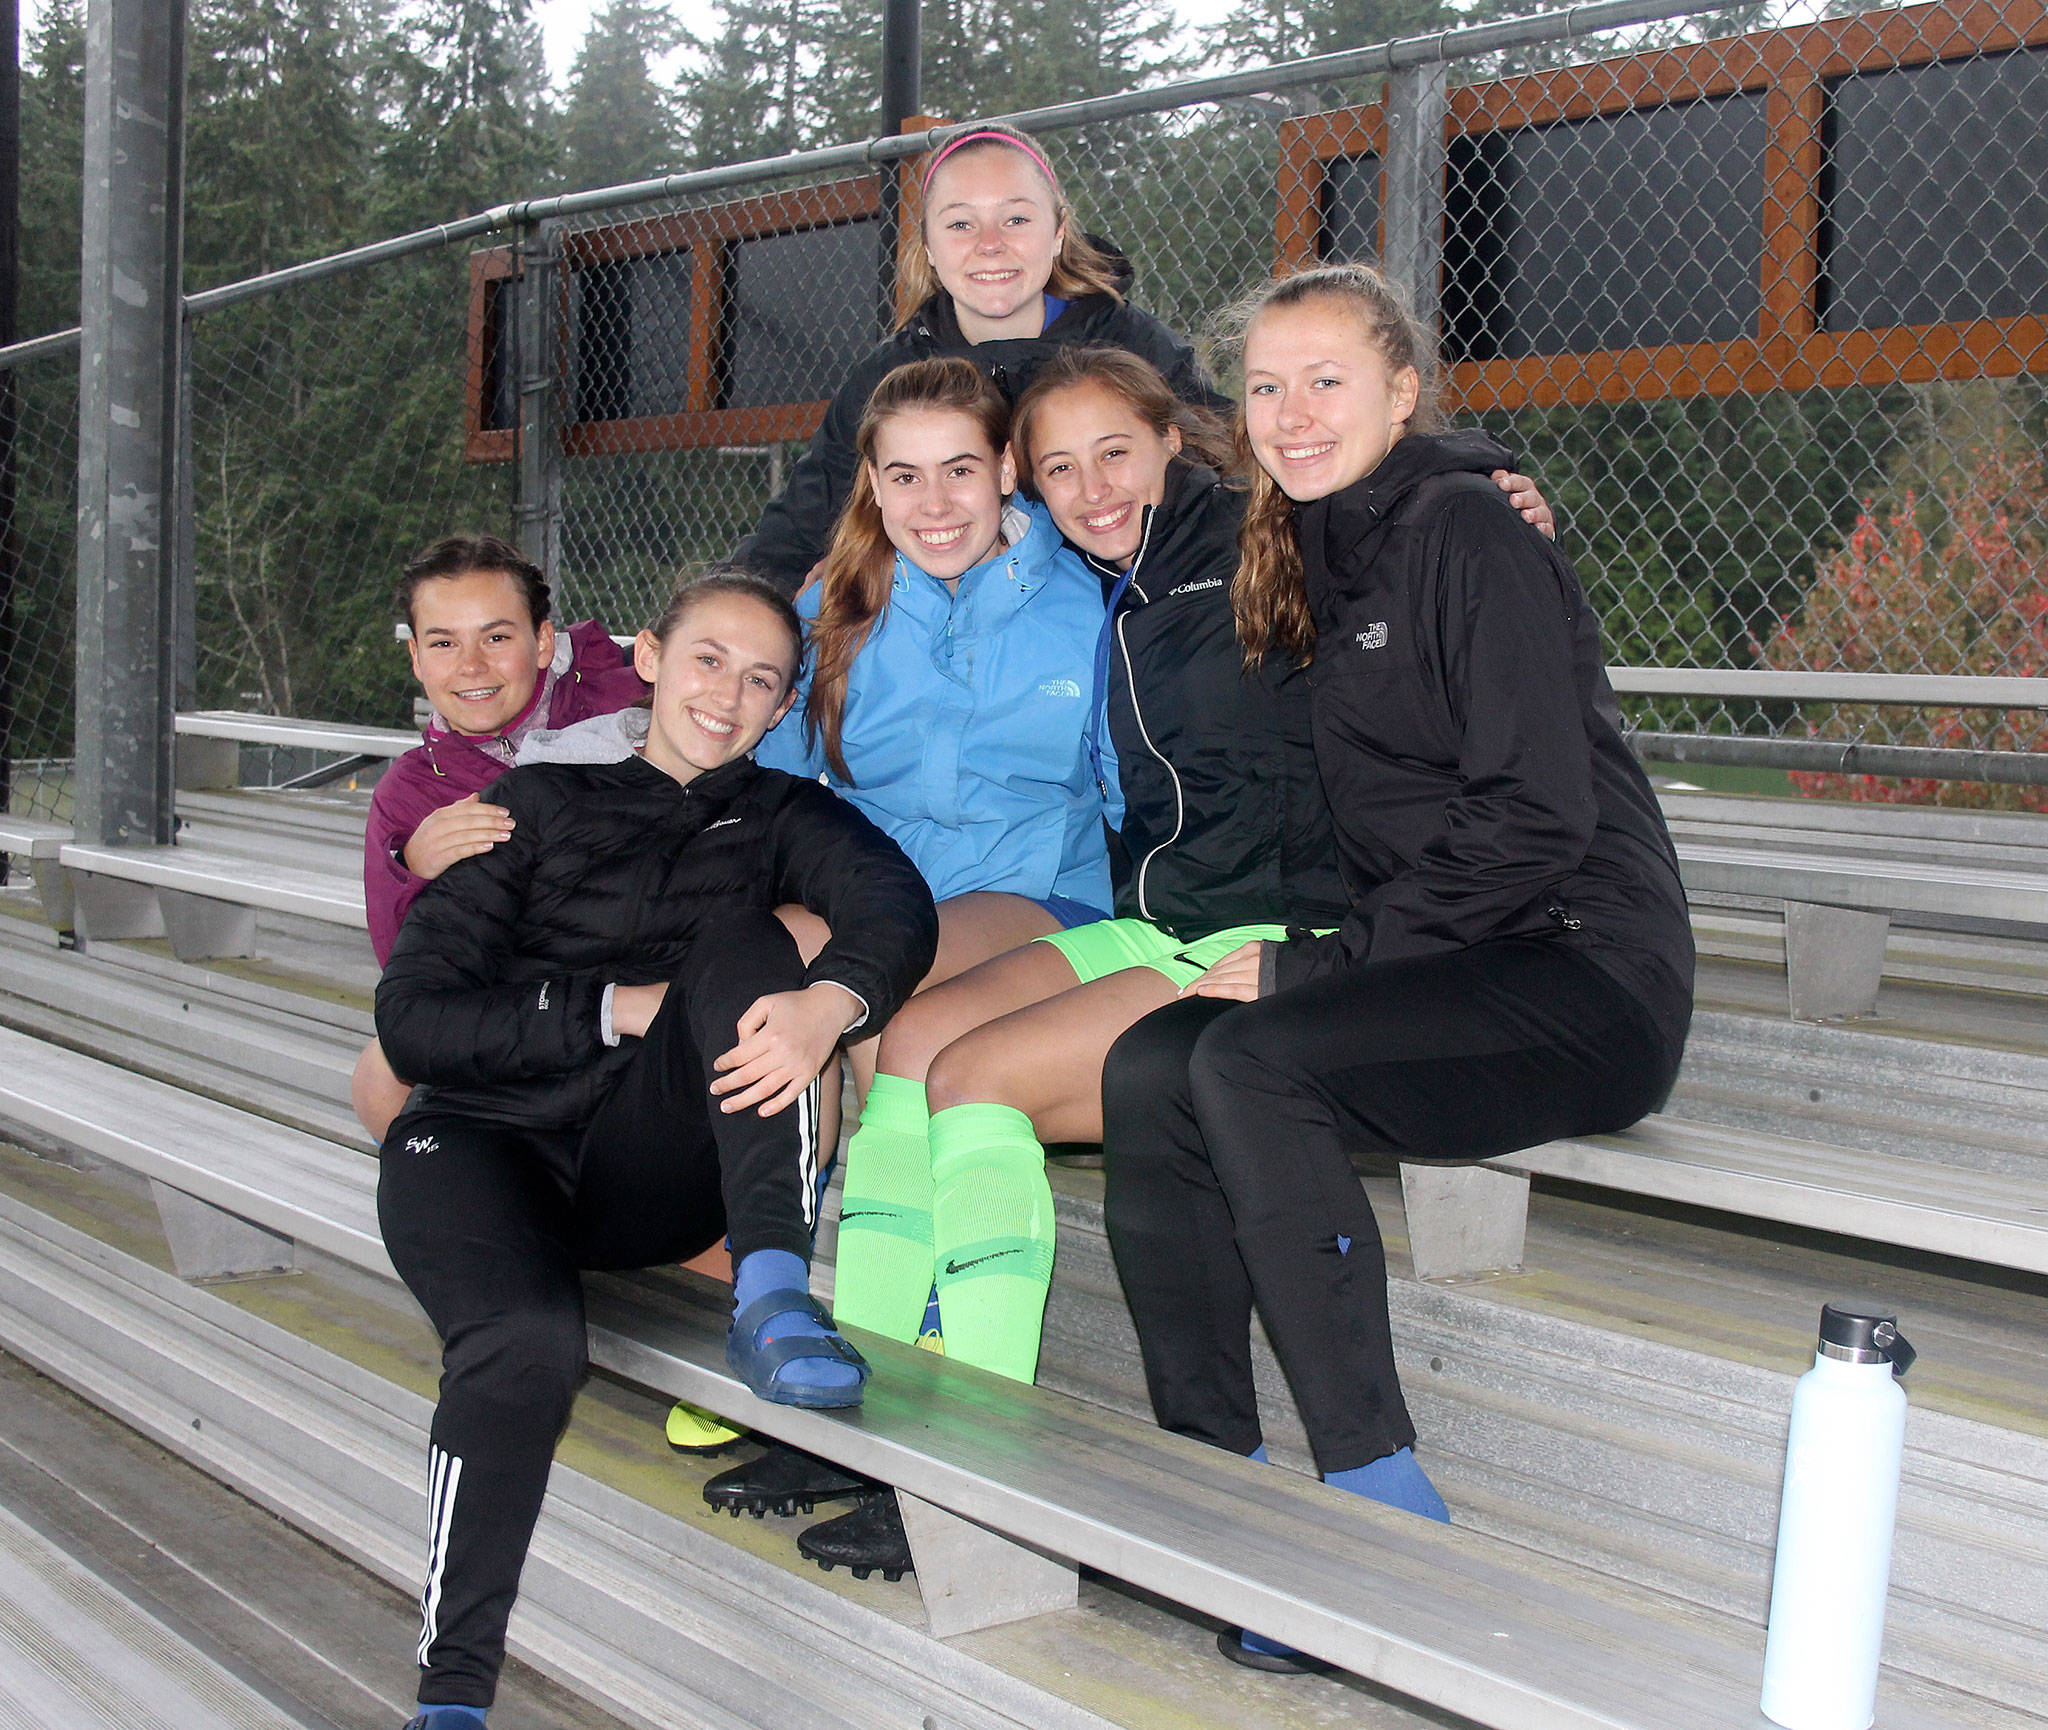 This nucleus of the senior class has lifted the Falcon soccer team to new heights: from the left, Alison Papritez, Ashley Ricketts, Samantha Ollis, Mallory Drye, Nicole Helseth and Lila McCleary. (Photo by Jim Waller/South Whidbey Record)